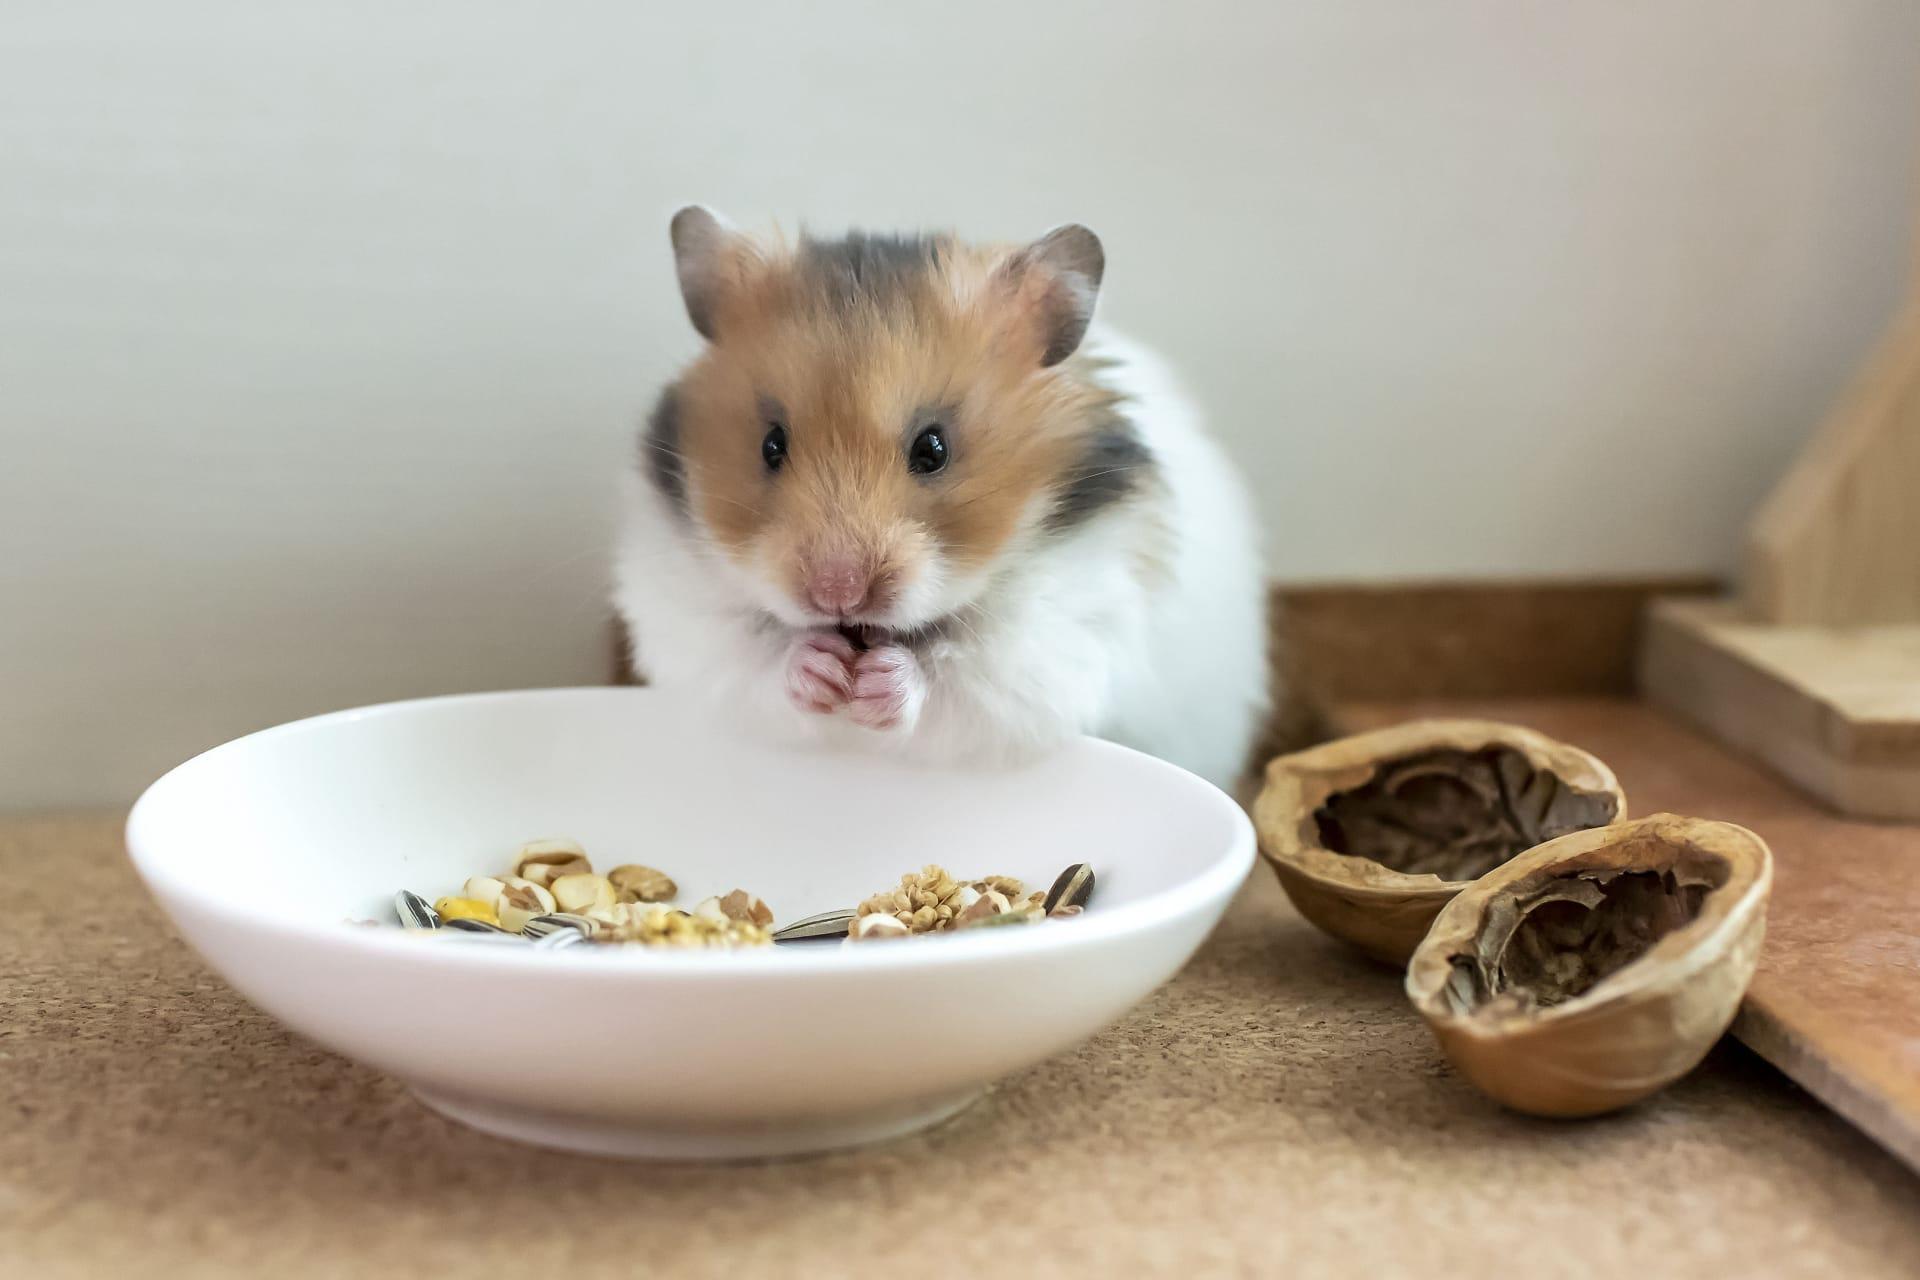 Hamster pictures